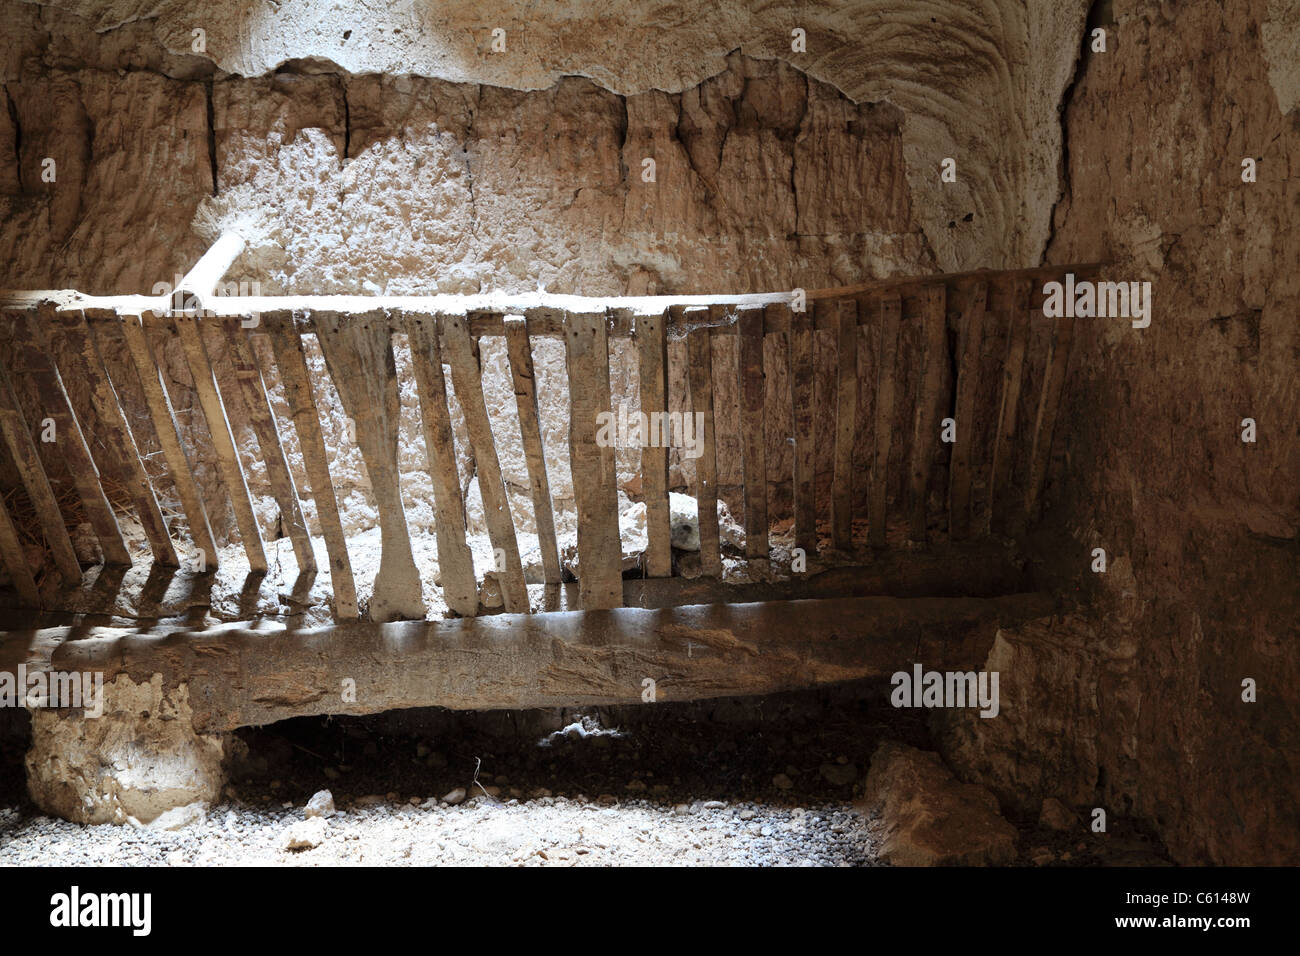 Crib in a cave house in Spain Stock Photo